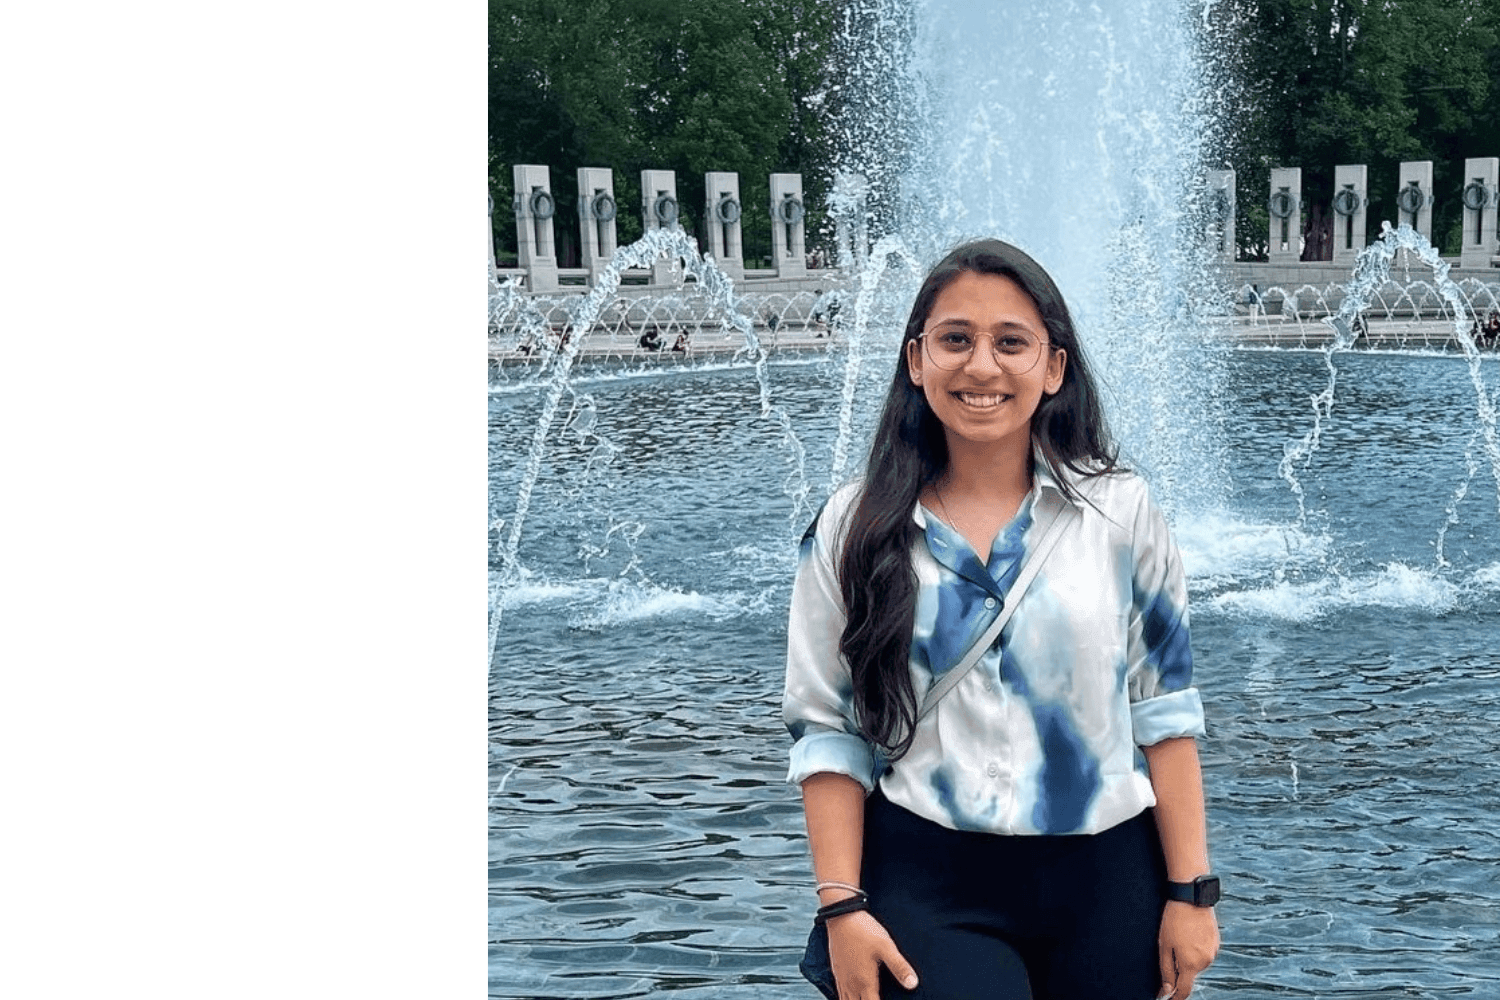 Saasha Joshi, a current graduate student at the University of Victoria pursuing a Master’s degree in computer science